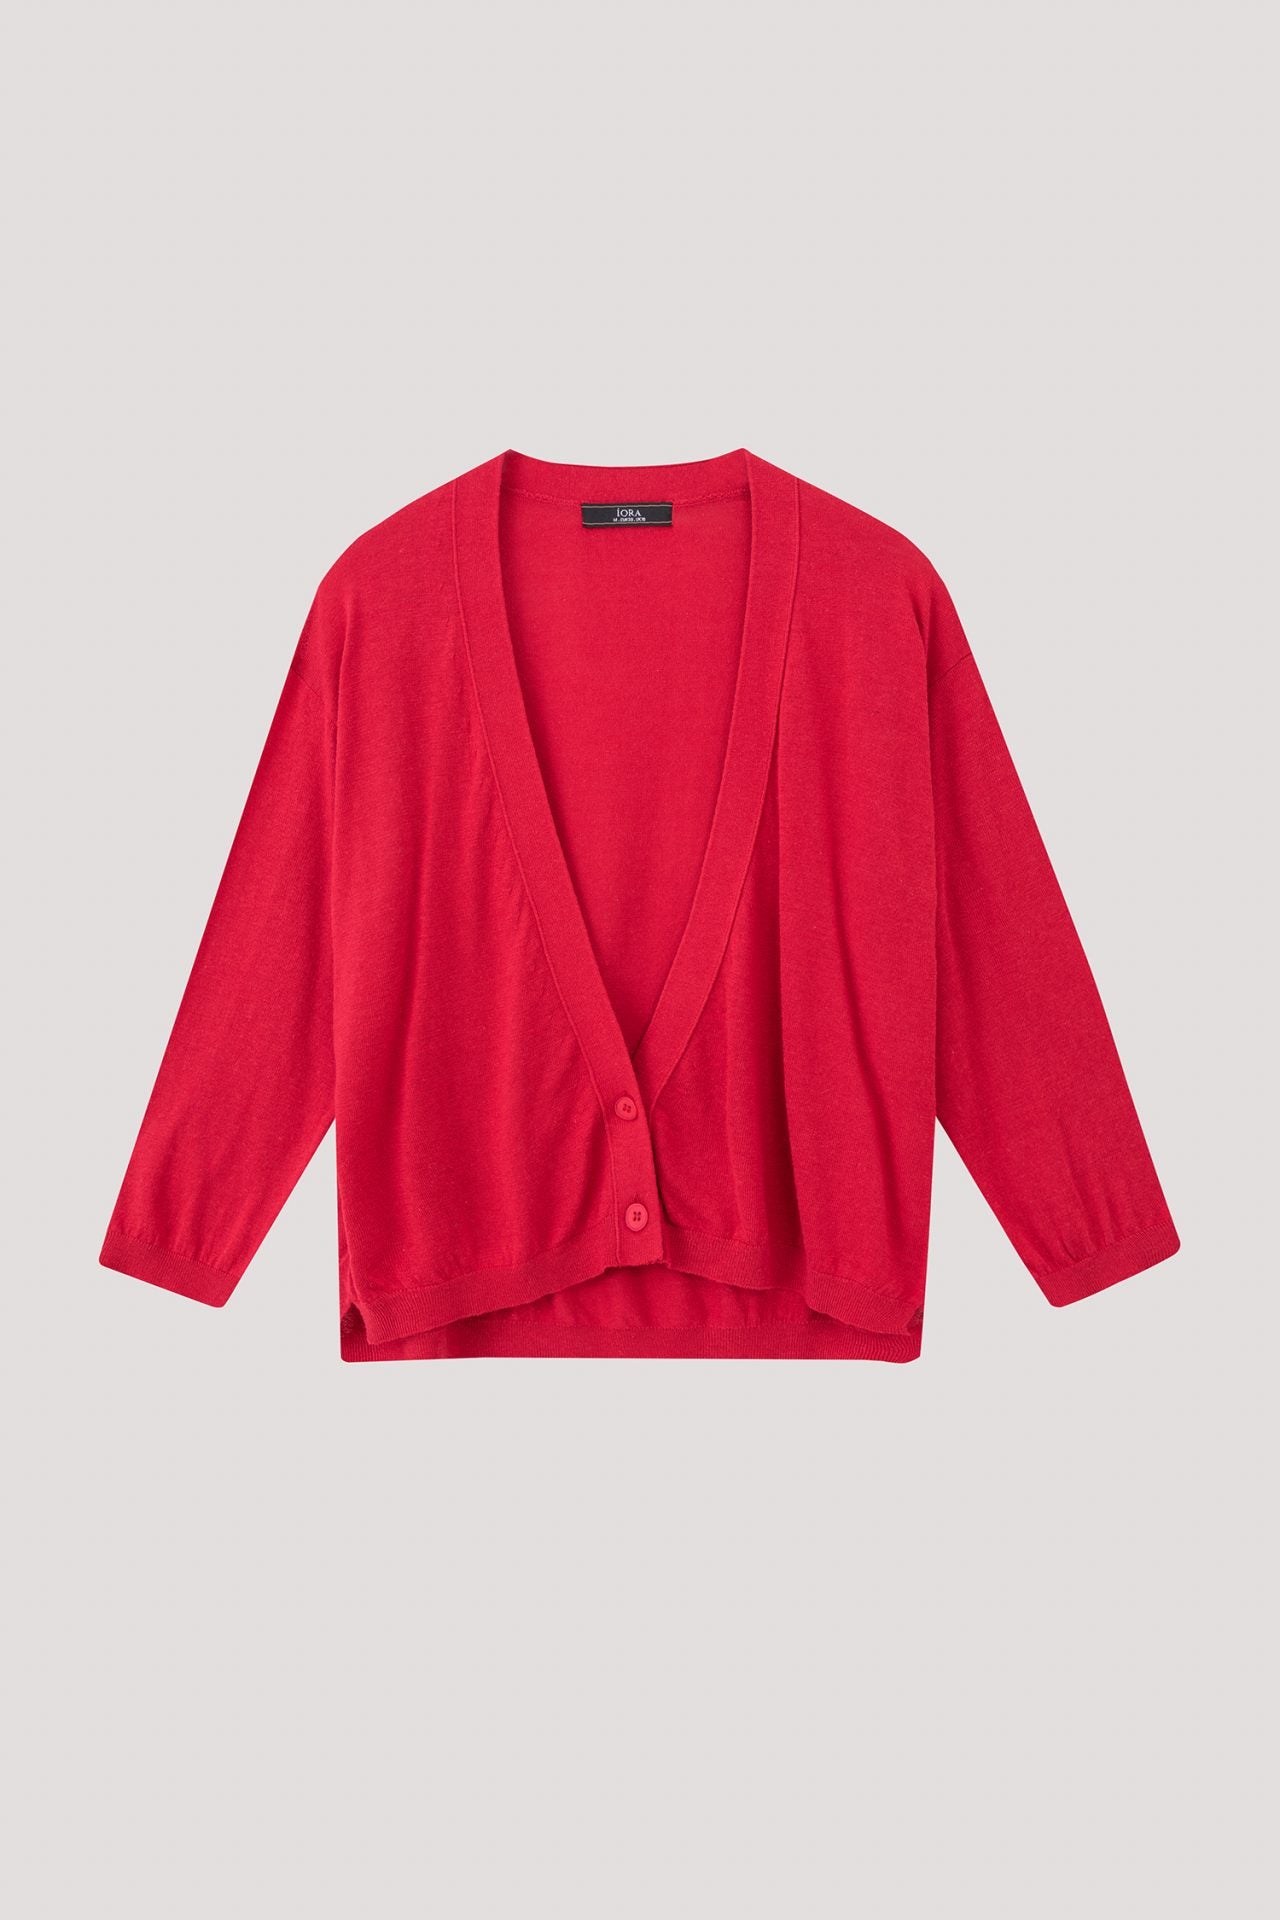 ACL 11177 V NECK CARDIGAN RED